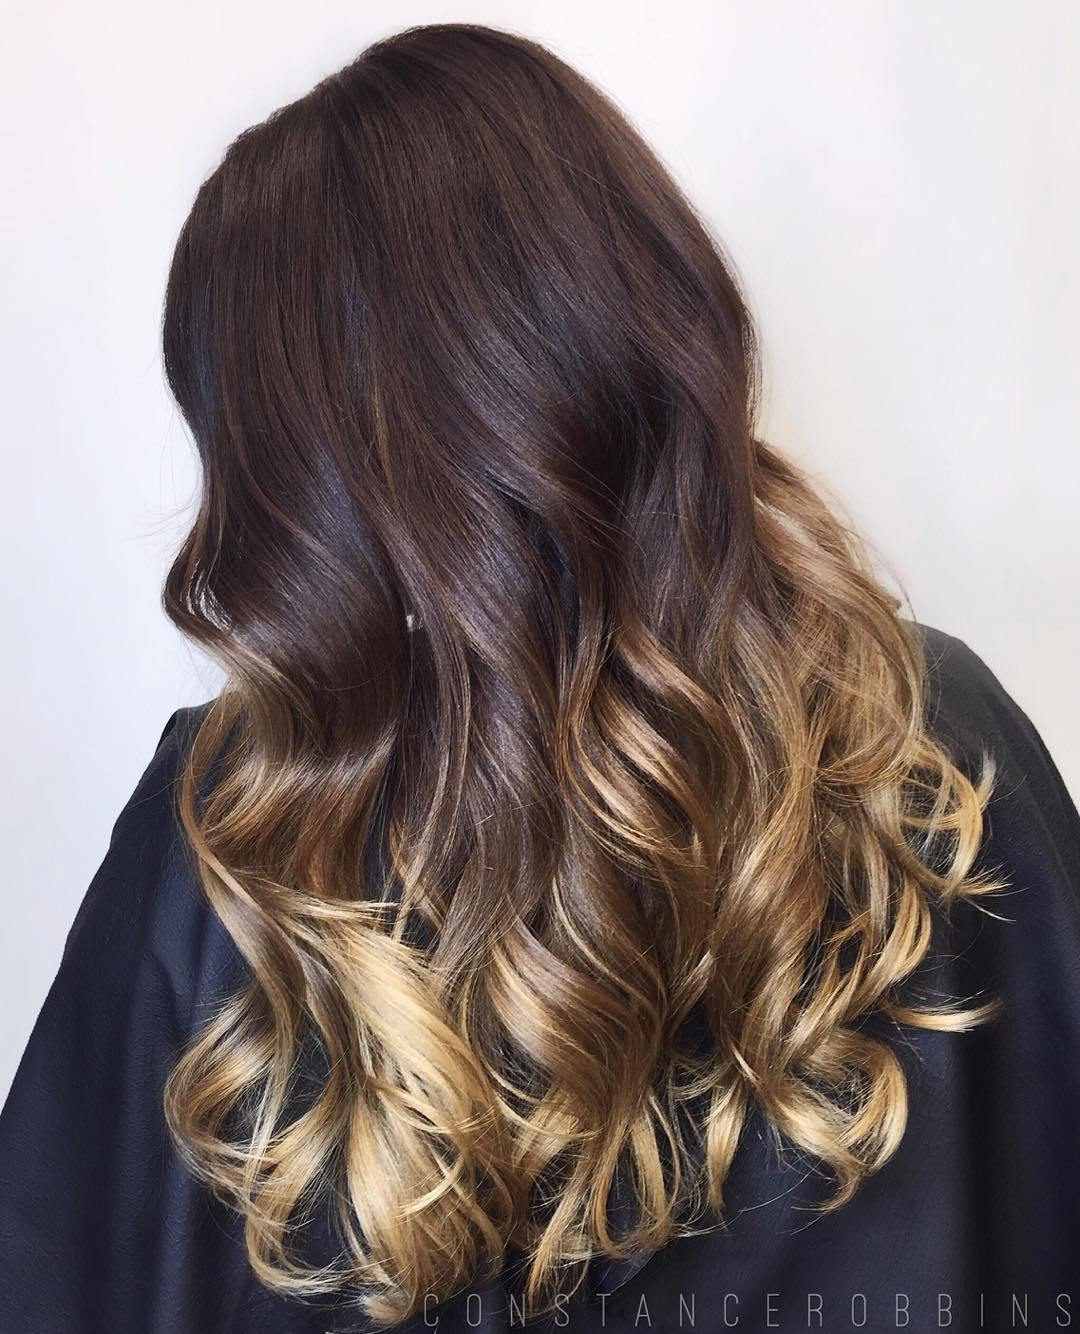 60 Best Ombre Hair Color Ideas for Blond, Brown, Red and Black Hair